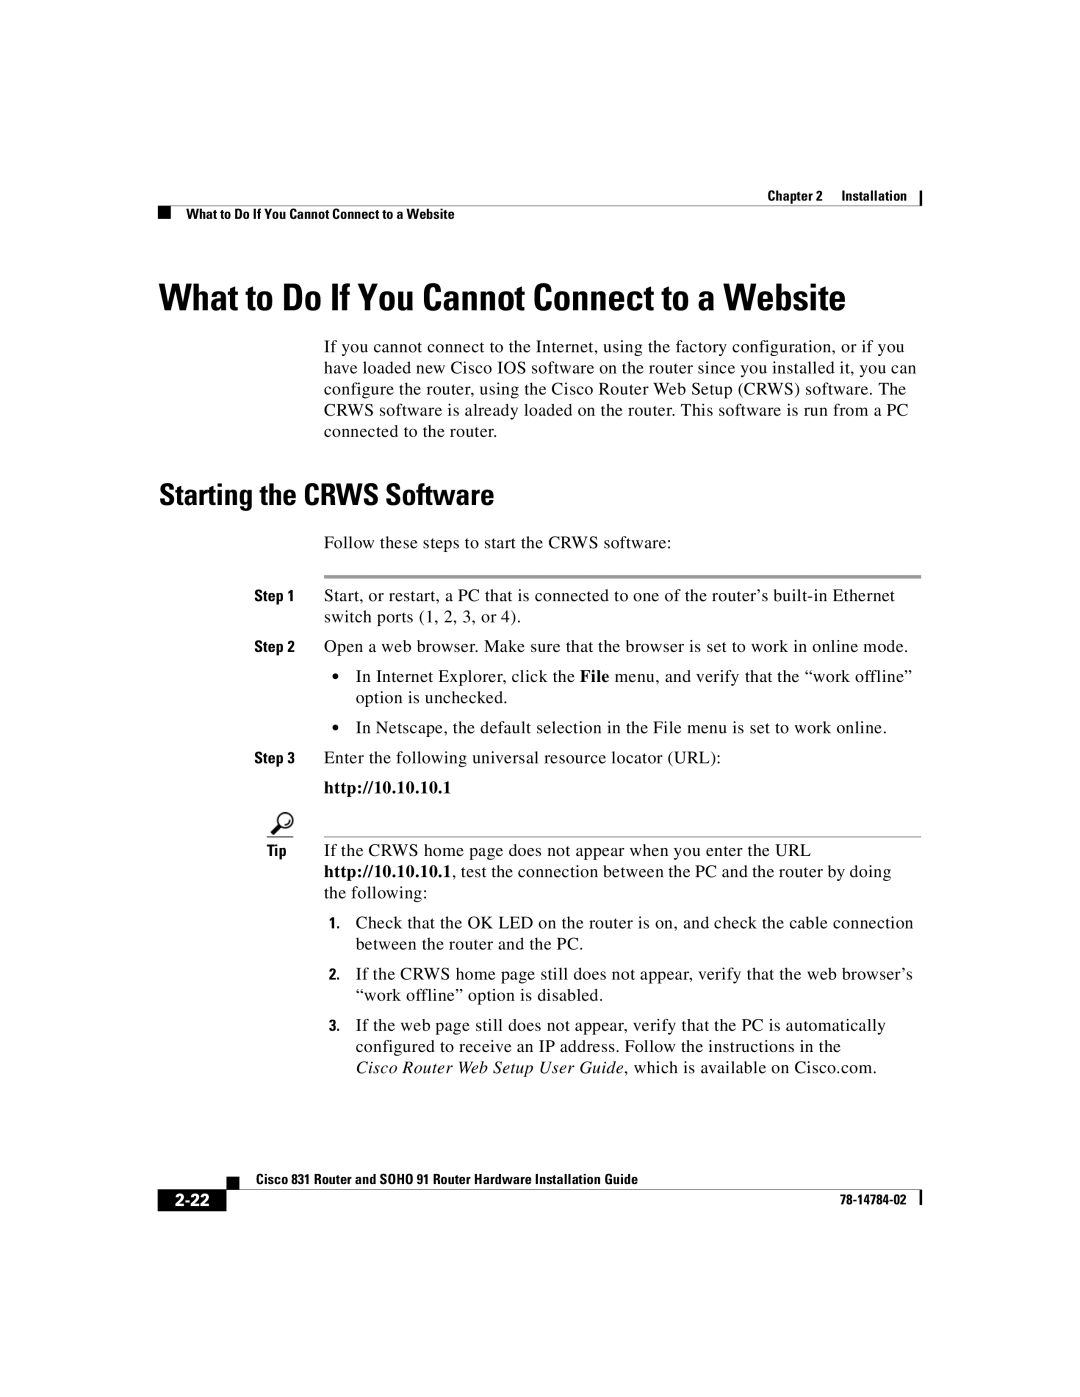 Cisco Systems Cisco 831 manual What to Do If You Cannot Connect to a Website, Starting the Crws Software 